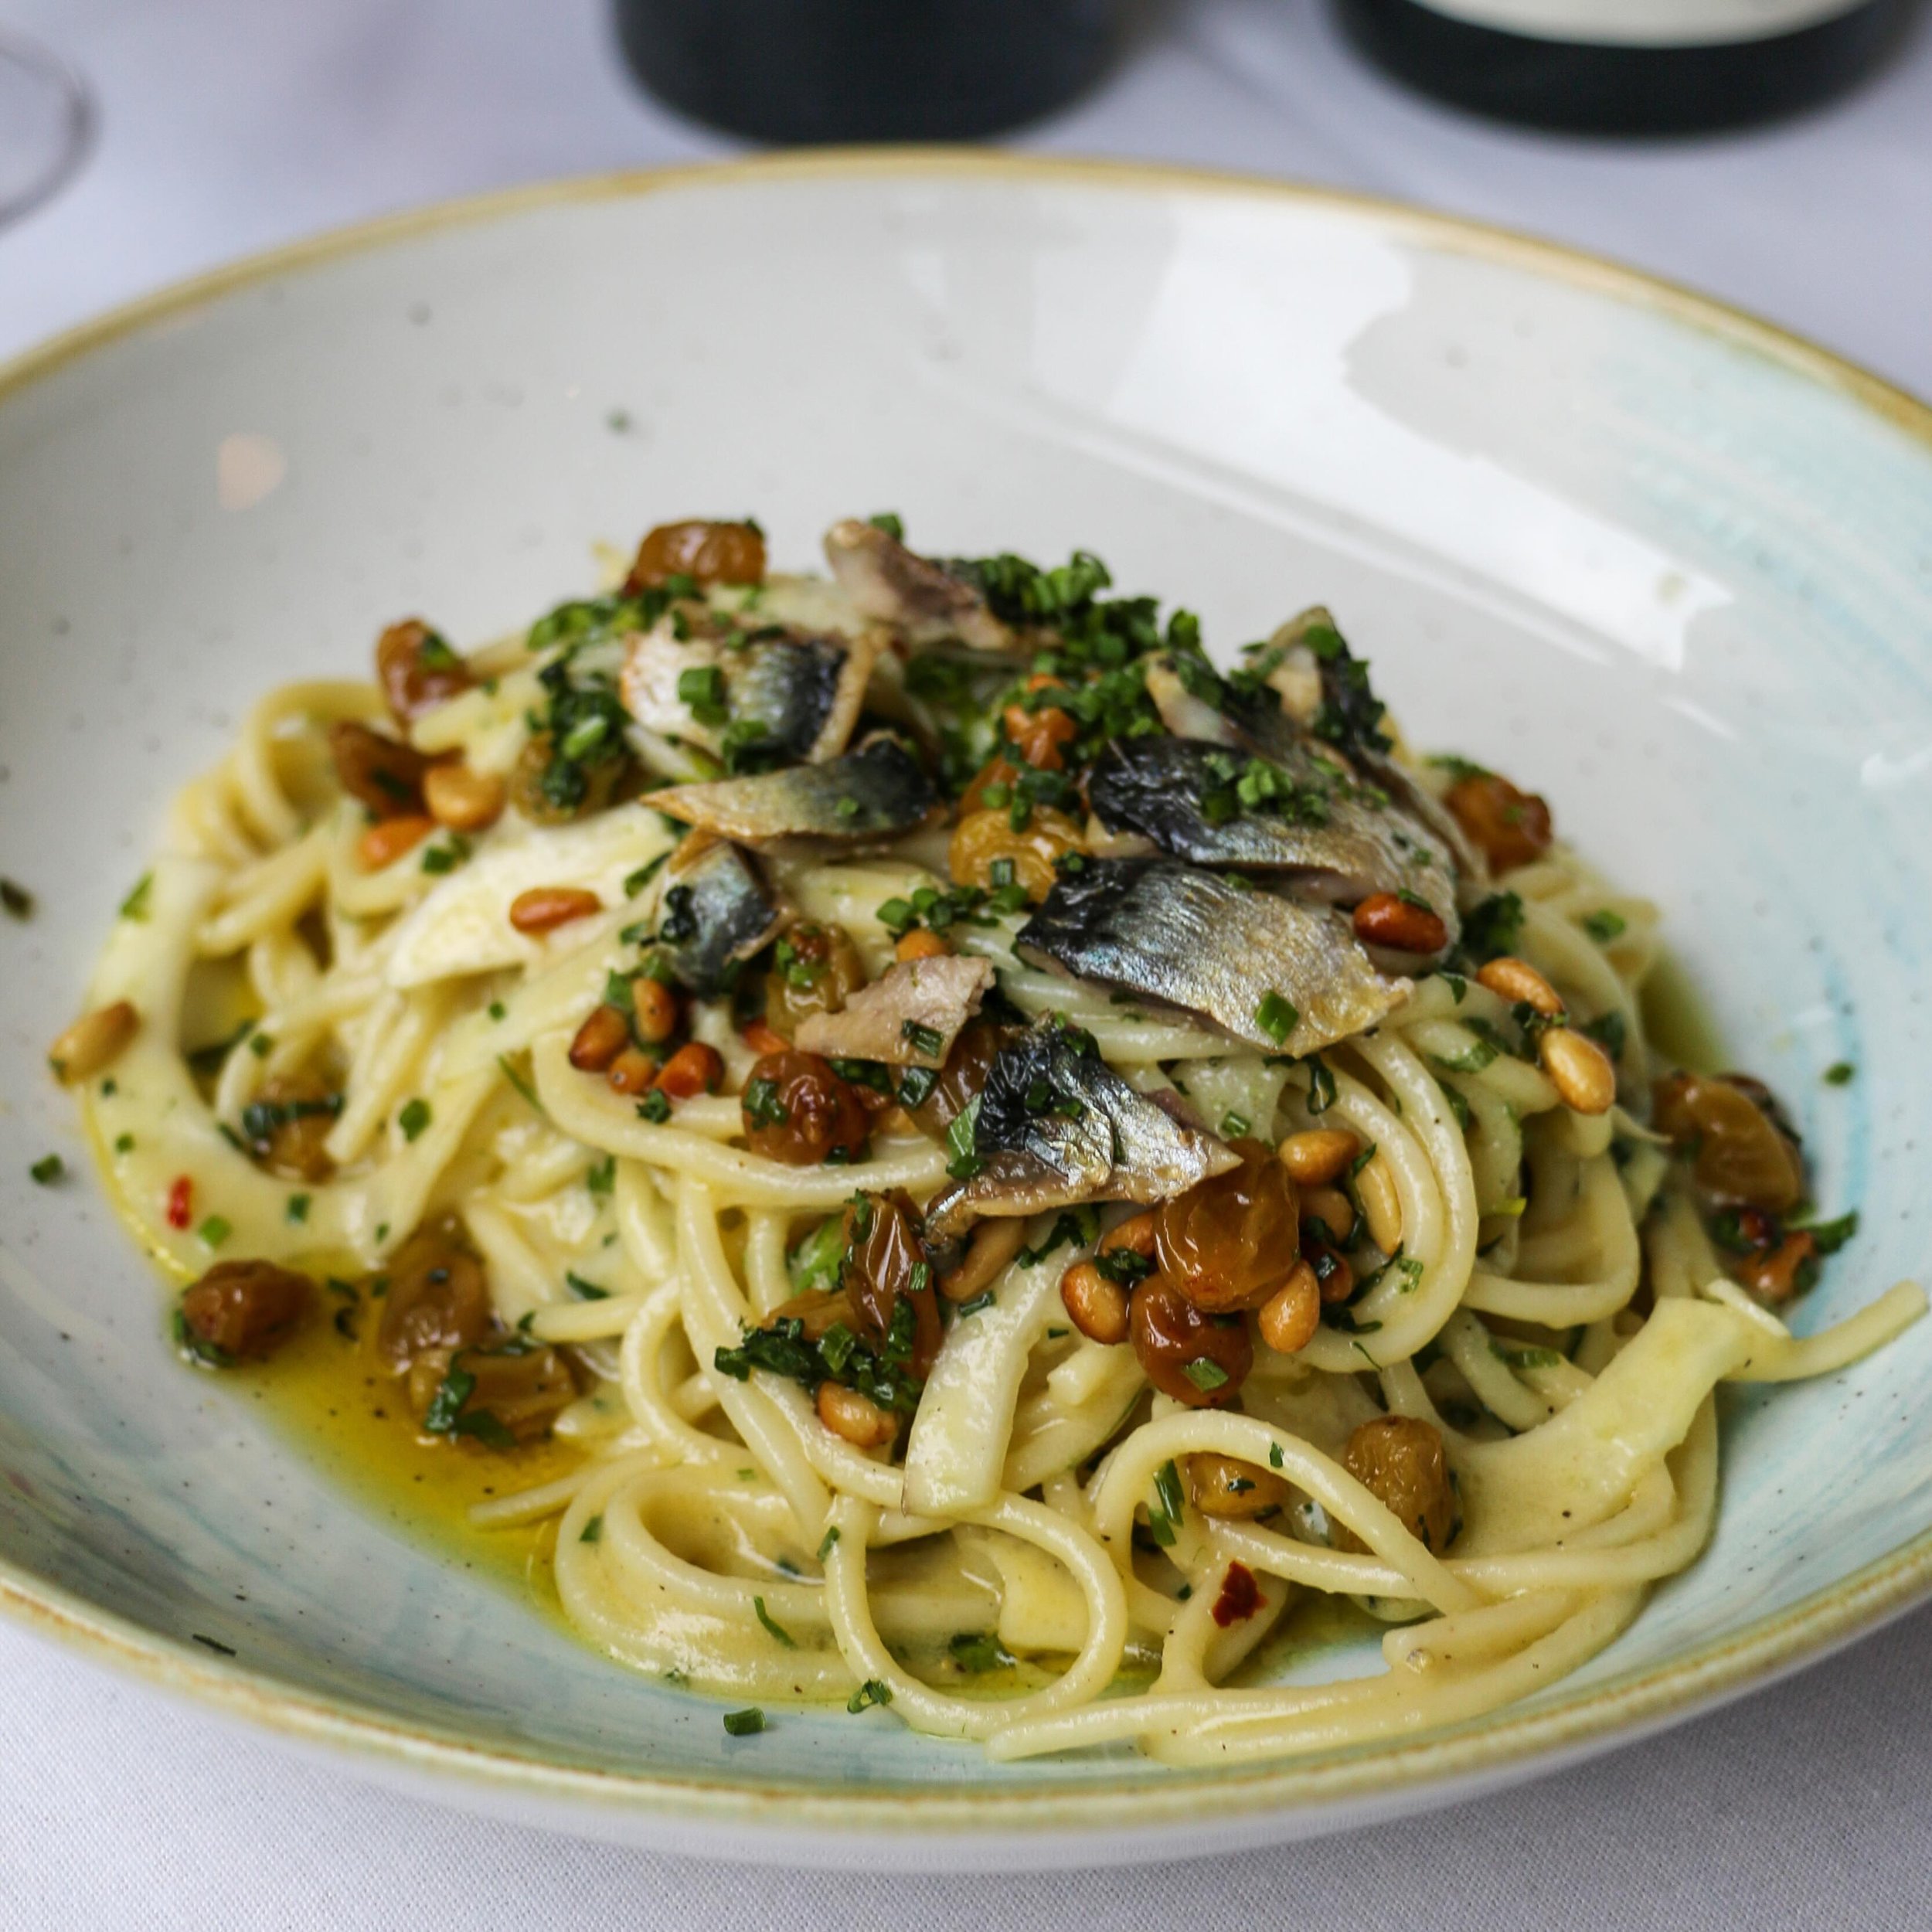 Have you tried our Savoring Sicily menu? This is the LAST NIGHT to order our limited-run tasting menu that celebrates the best female winemakers of Sicily🍷 

[Second Course] Pasta con le Sarde: chitarra pasta, house cured sardines, golden raisins, p